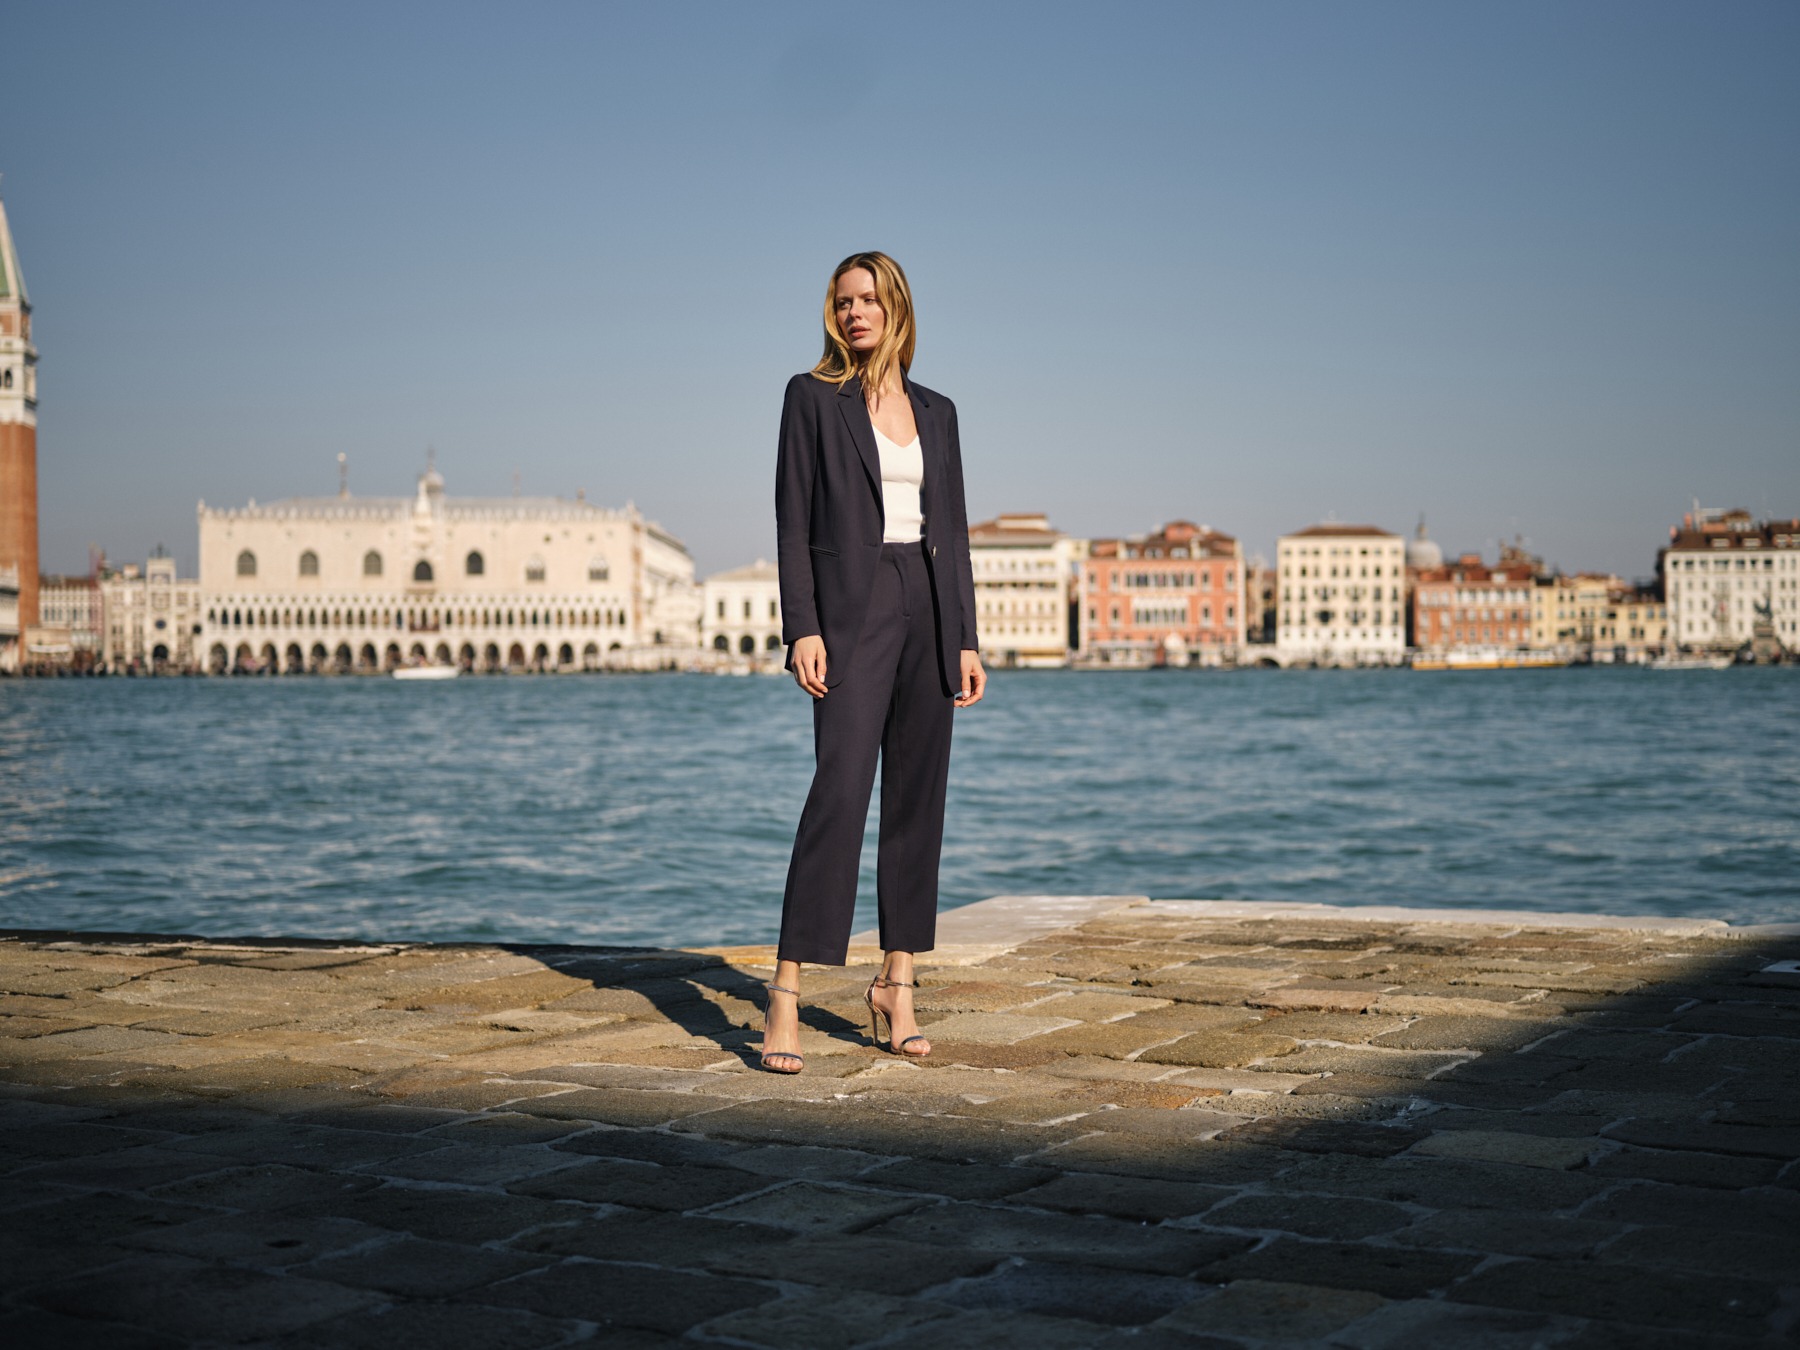 comma campaign venezia (35 images) by Mike Meyer Photography